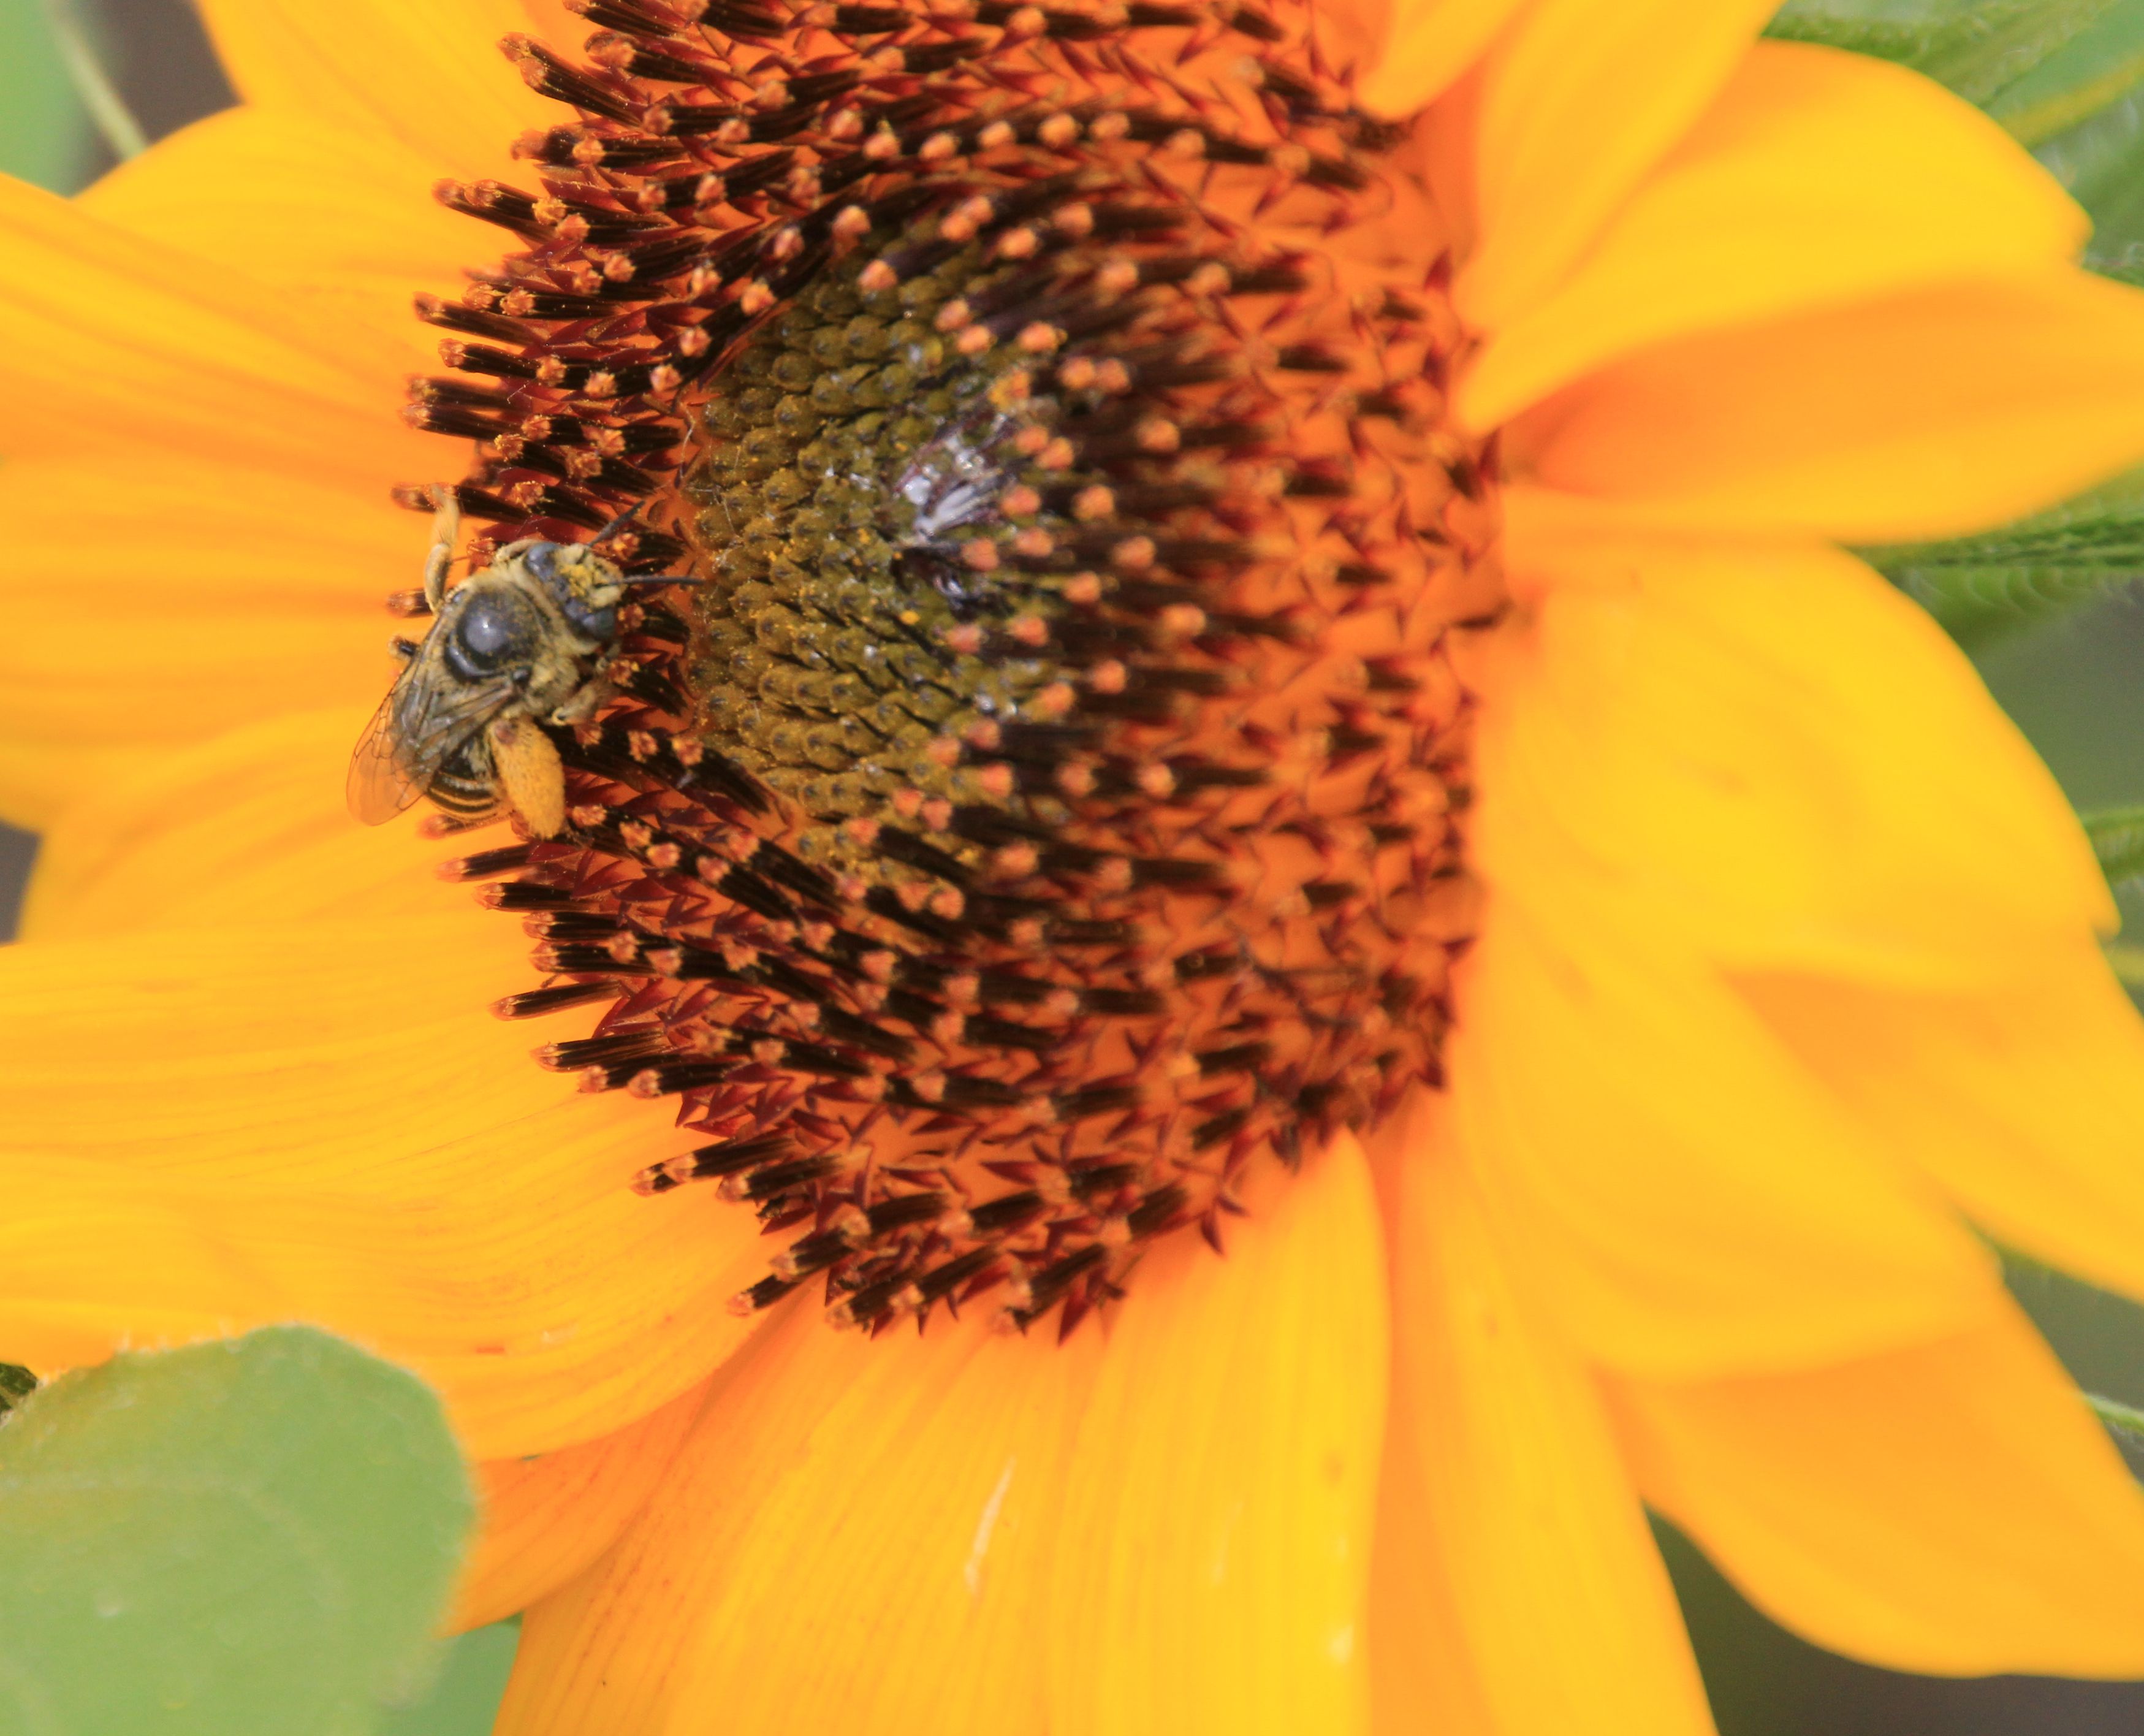 A bee sitting at the center of a bright, yellow sunflower